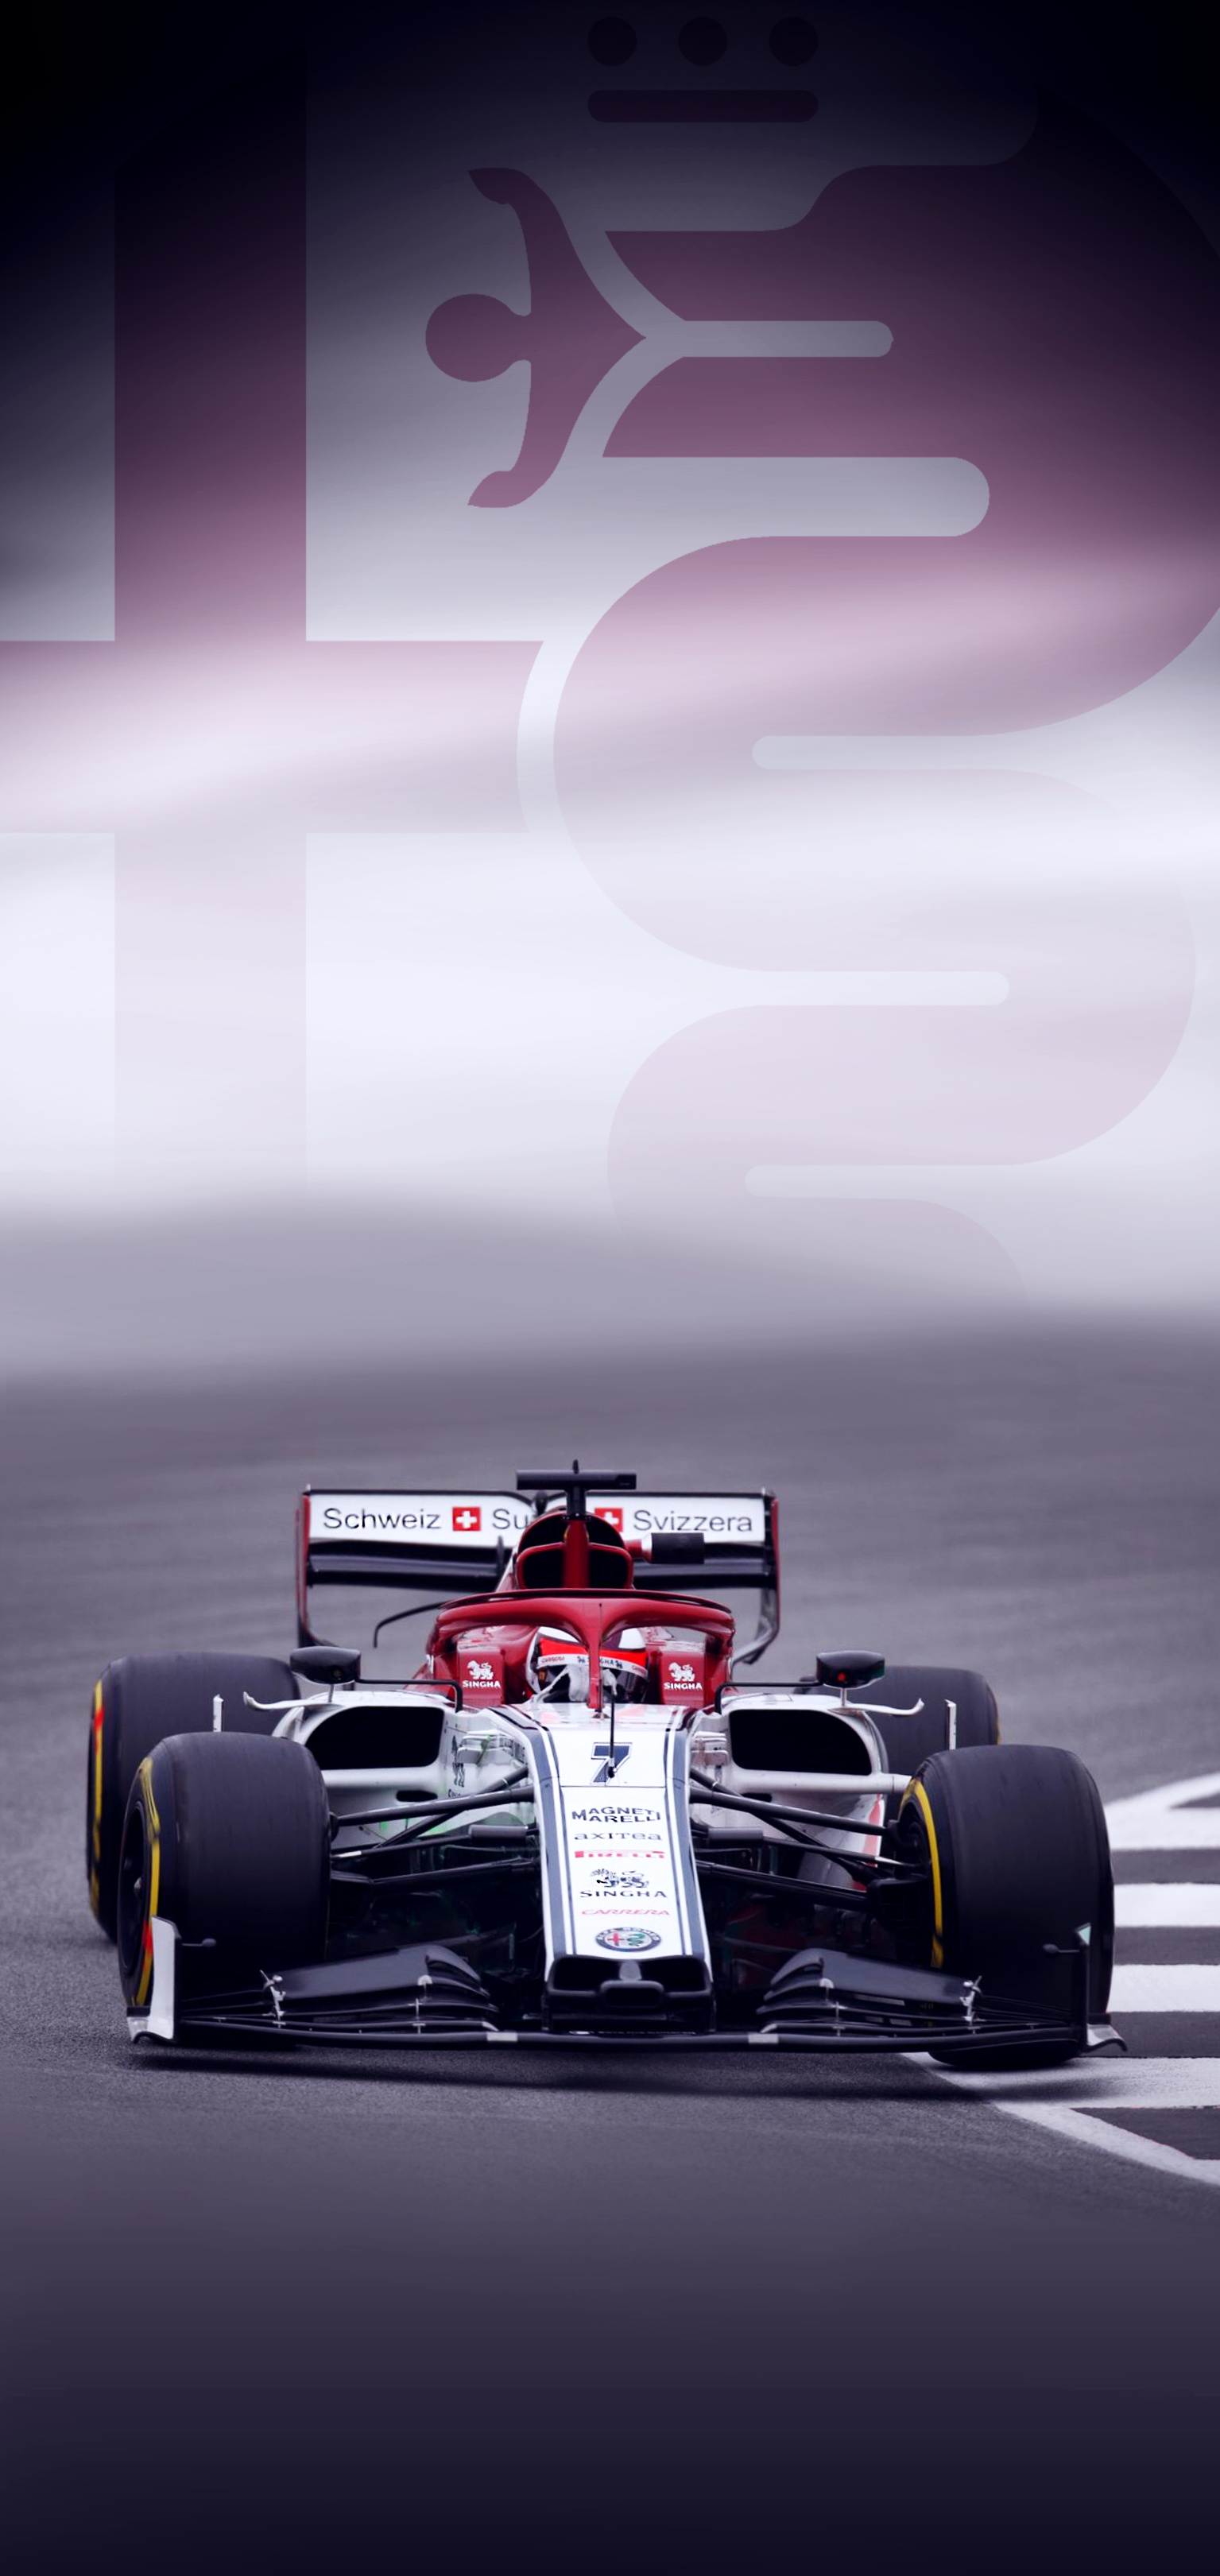 Kimi Raikkonen wallpapers, Top-quality backgrounds, Free to download, Impressive collection, 1540x3250 HD Handy